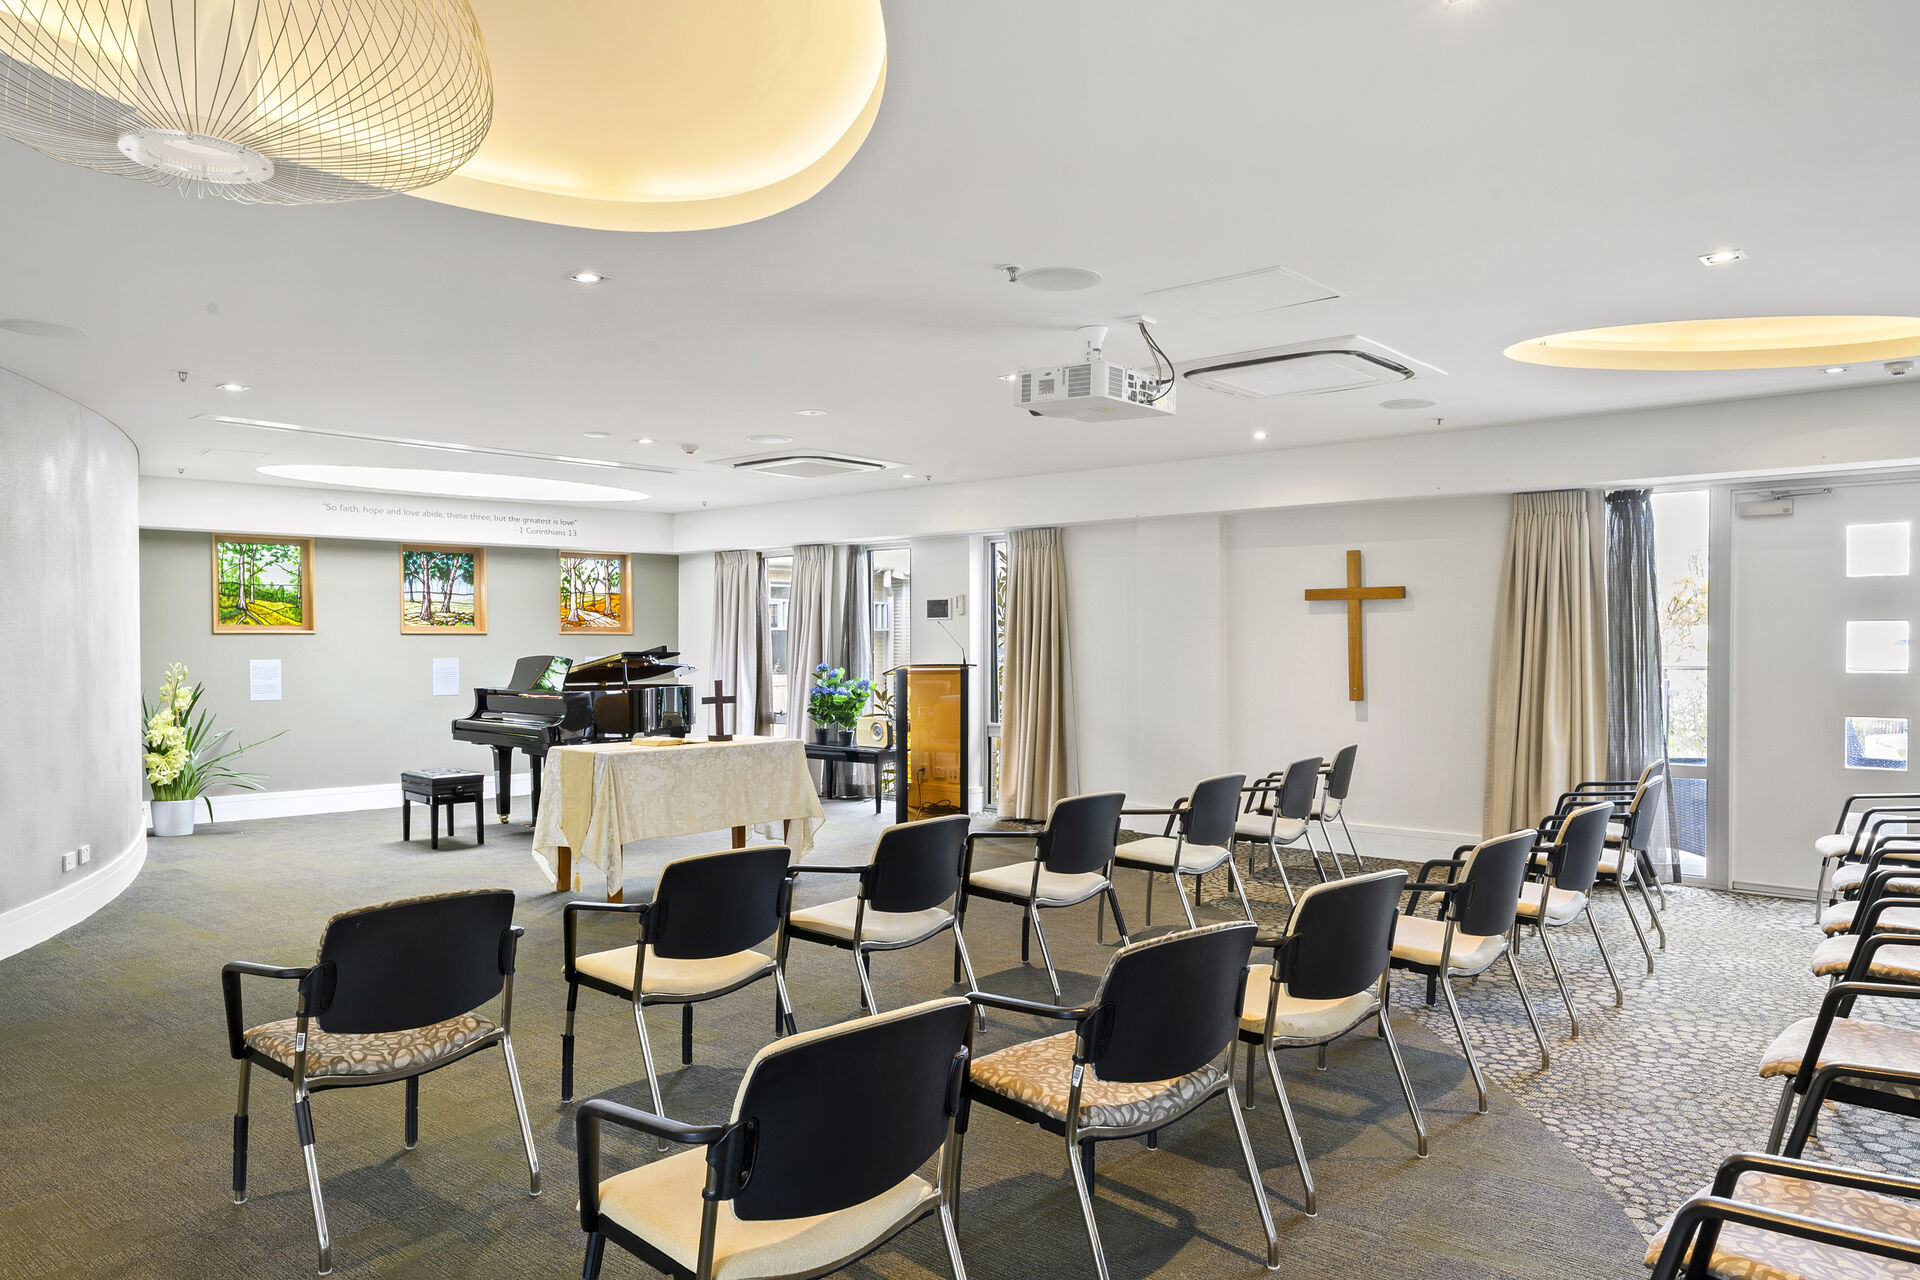 chapel for nursing home residents at baptistcare griffith residential aged care home